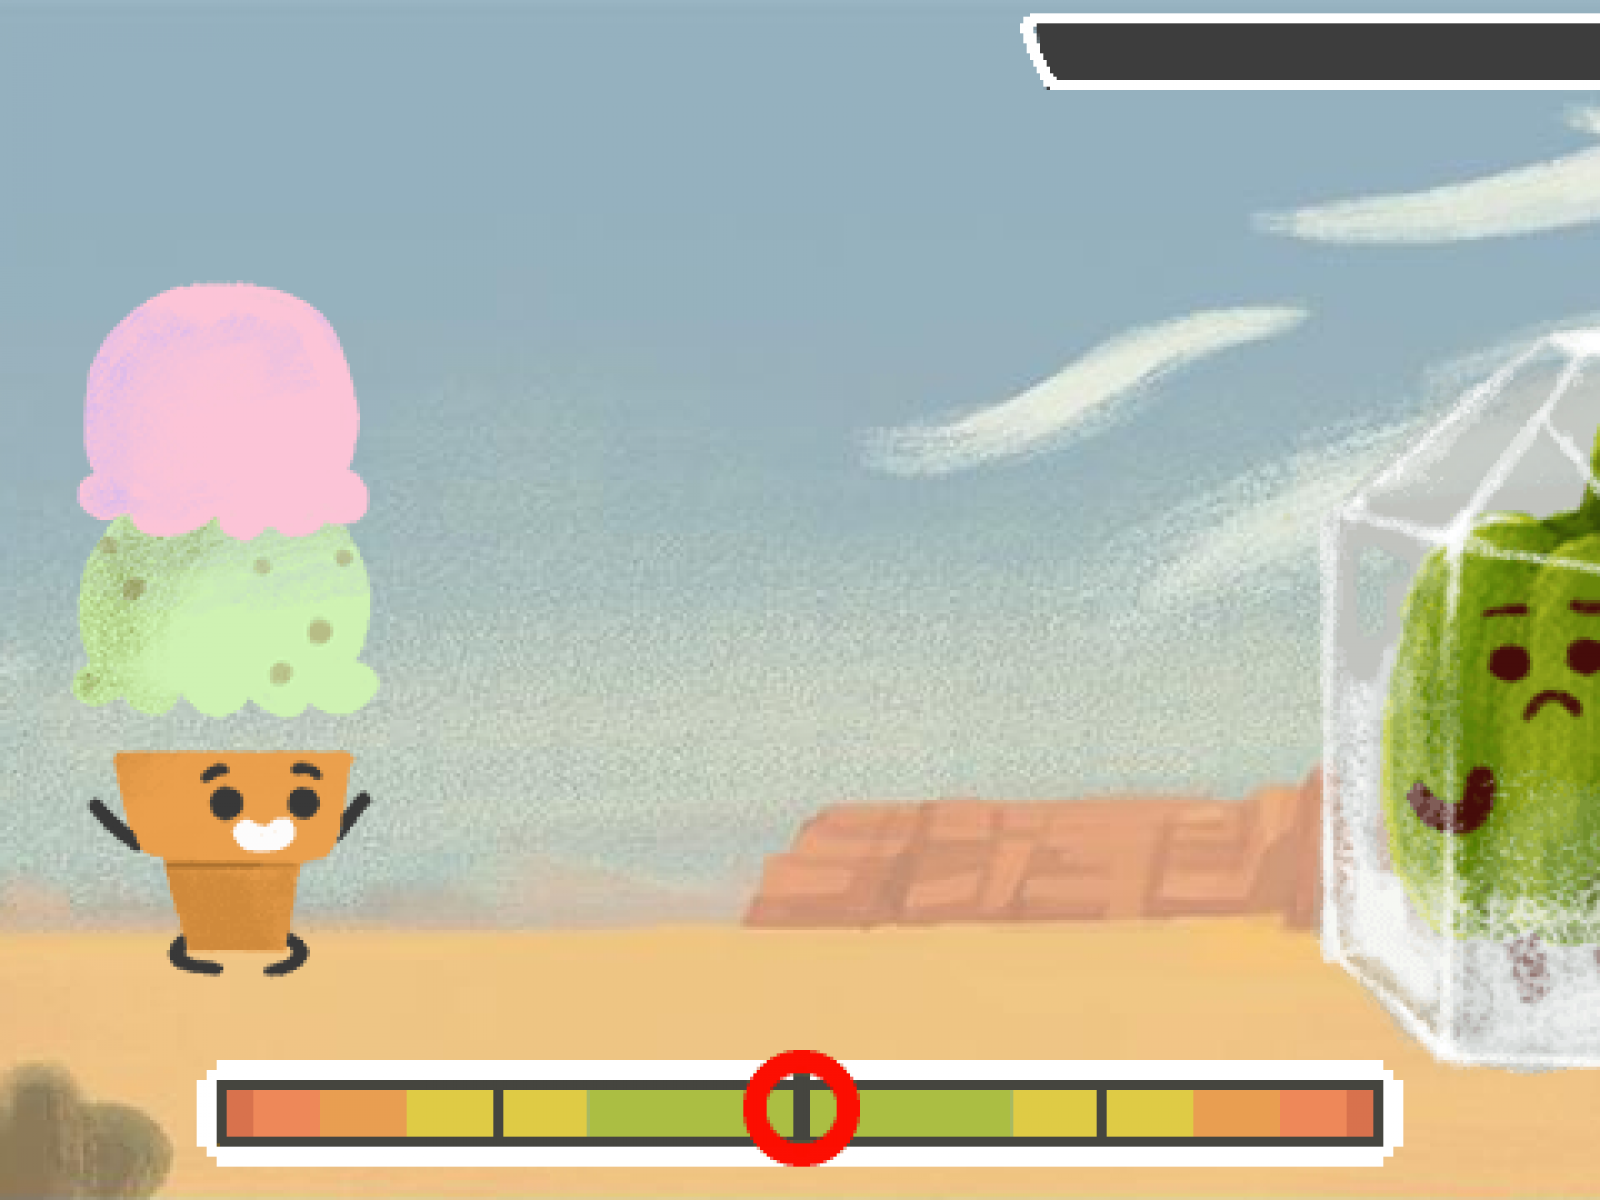 Popular Google Doodle Games: Stay and Play Garden Gnomes Game at